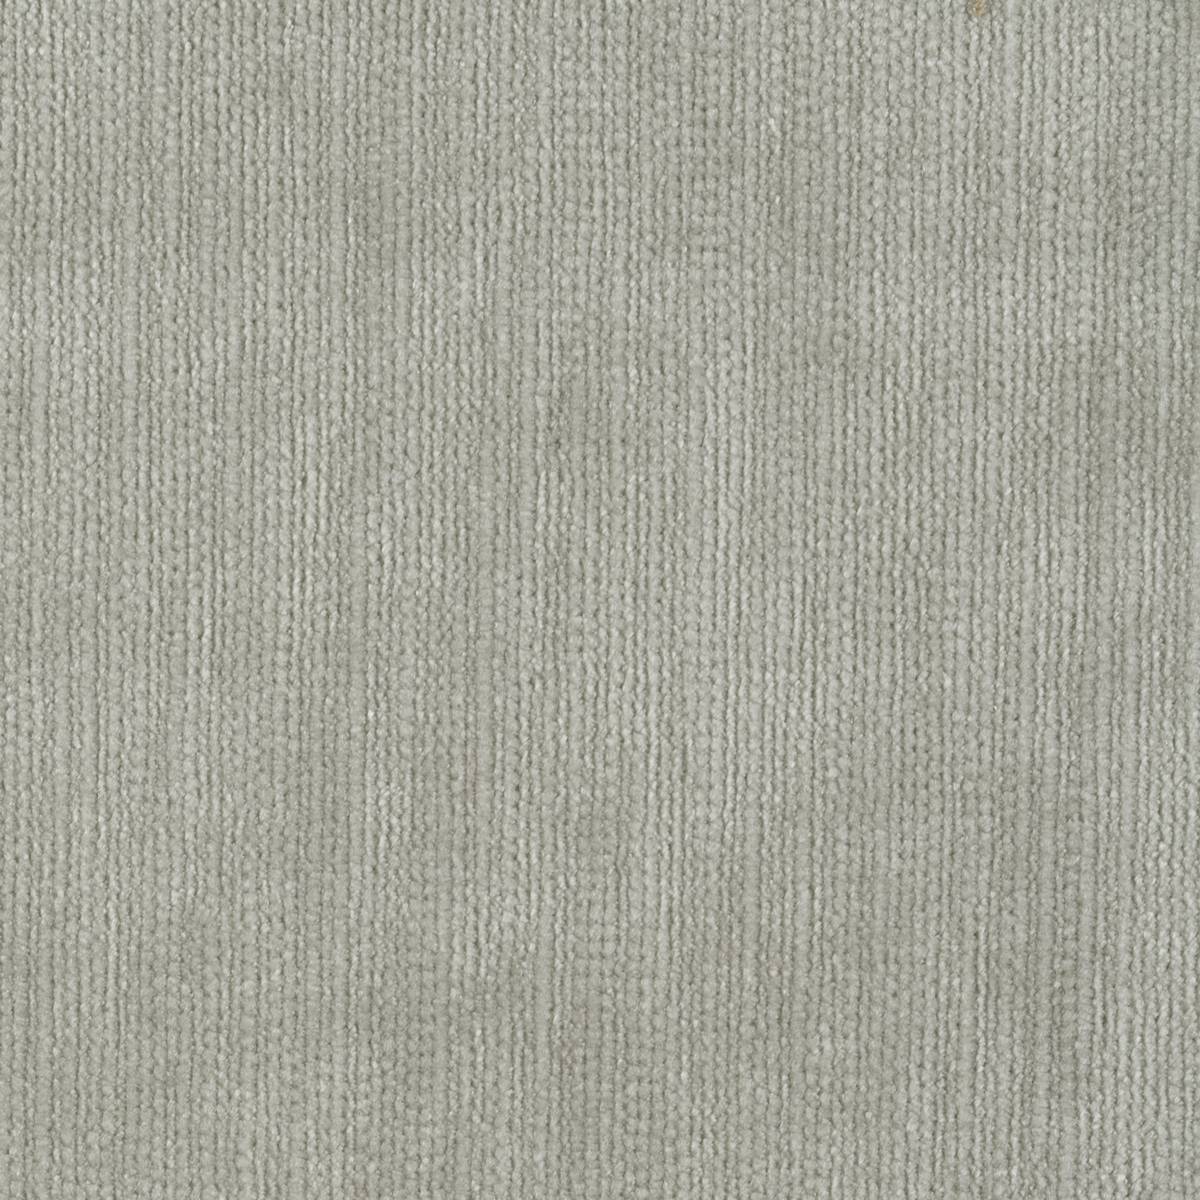 Momentum Velvets Silver Fabric by Harlequin